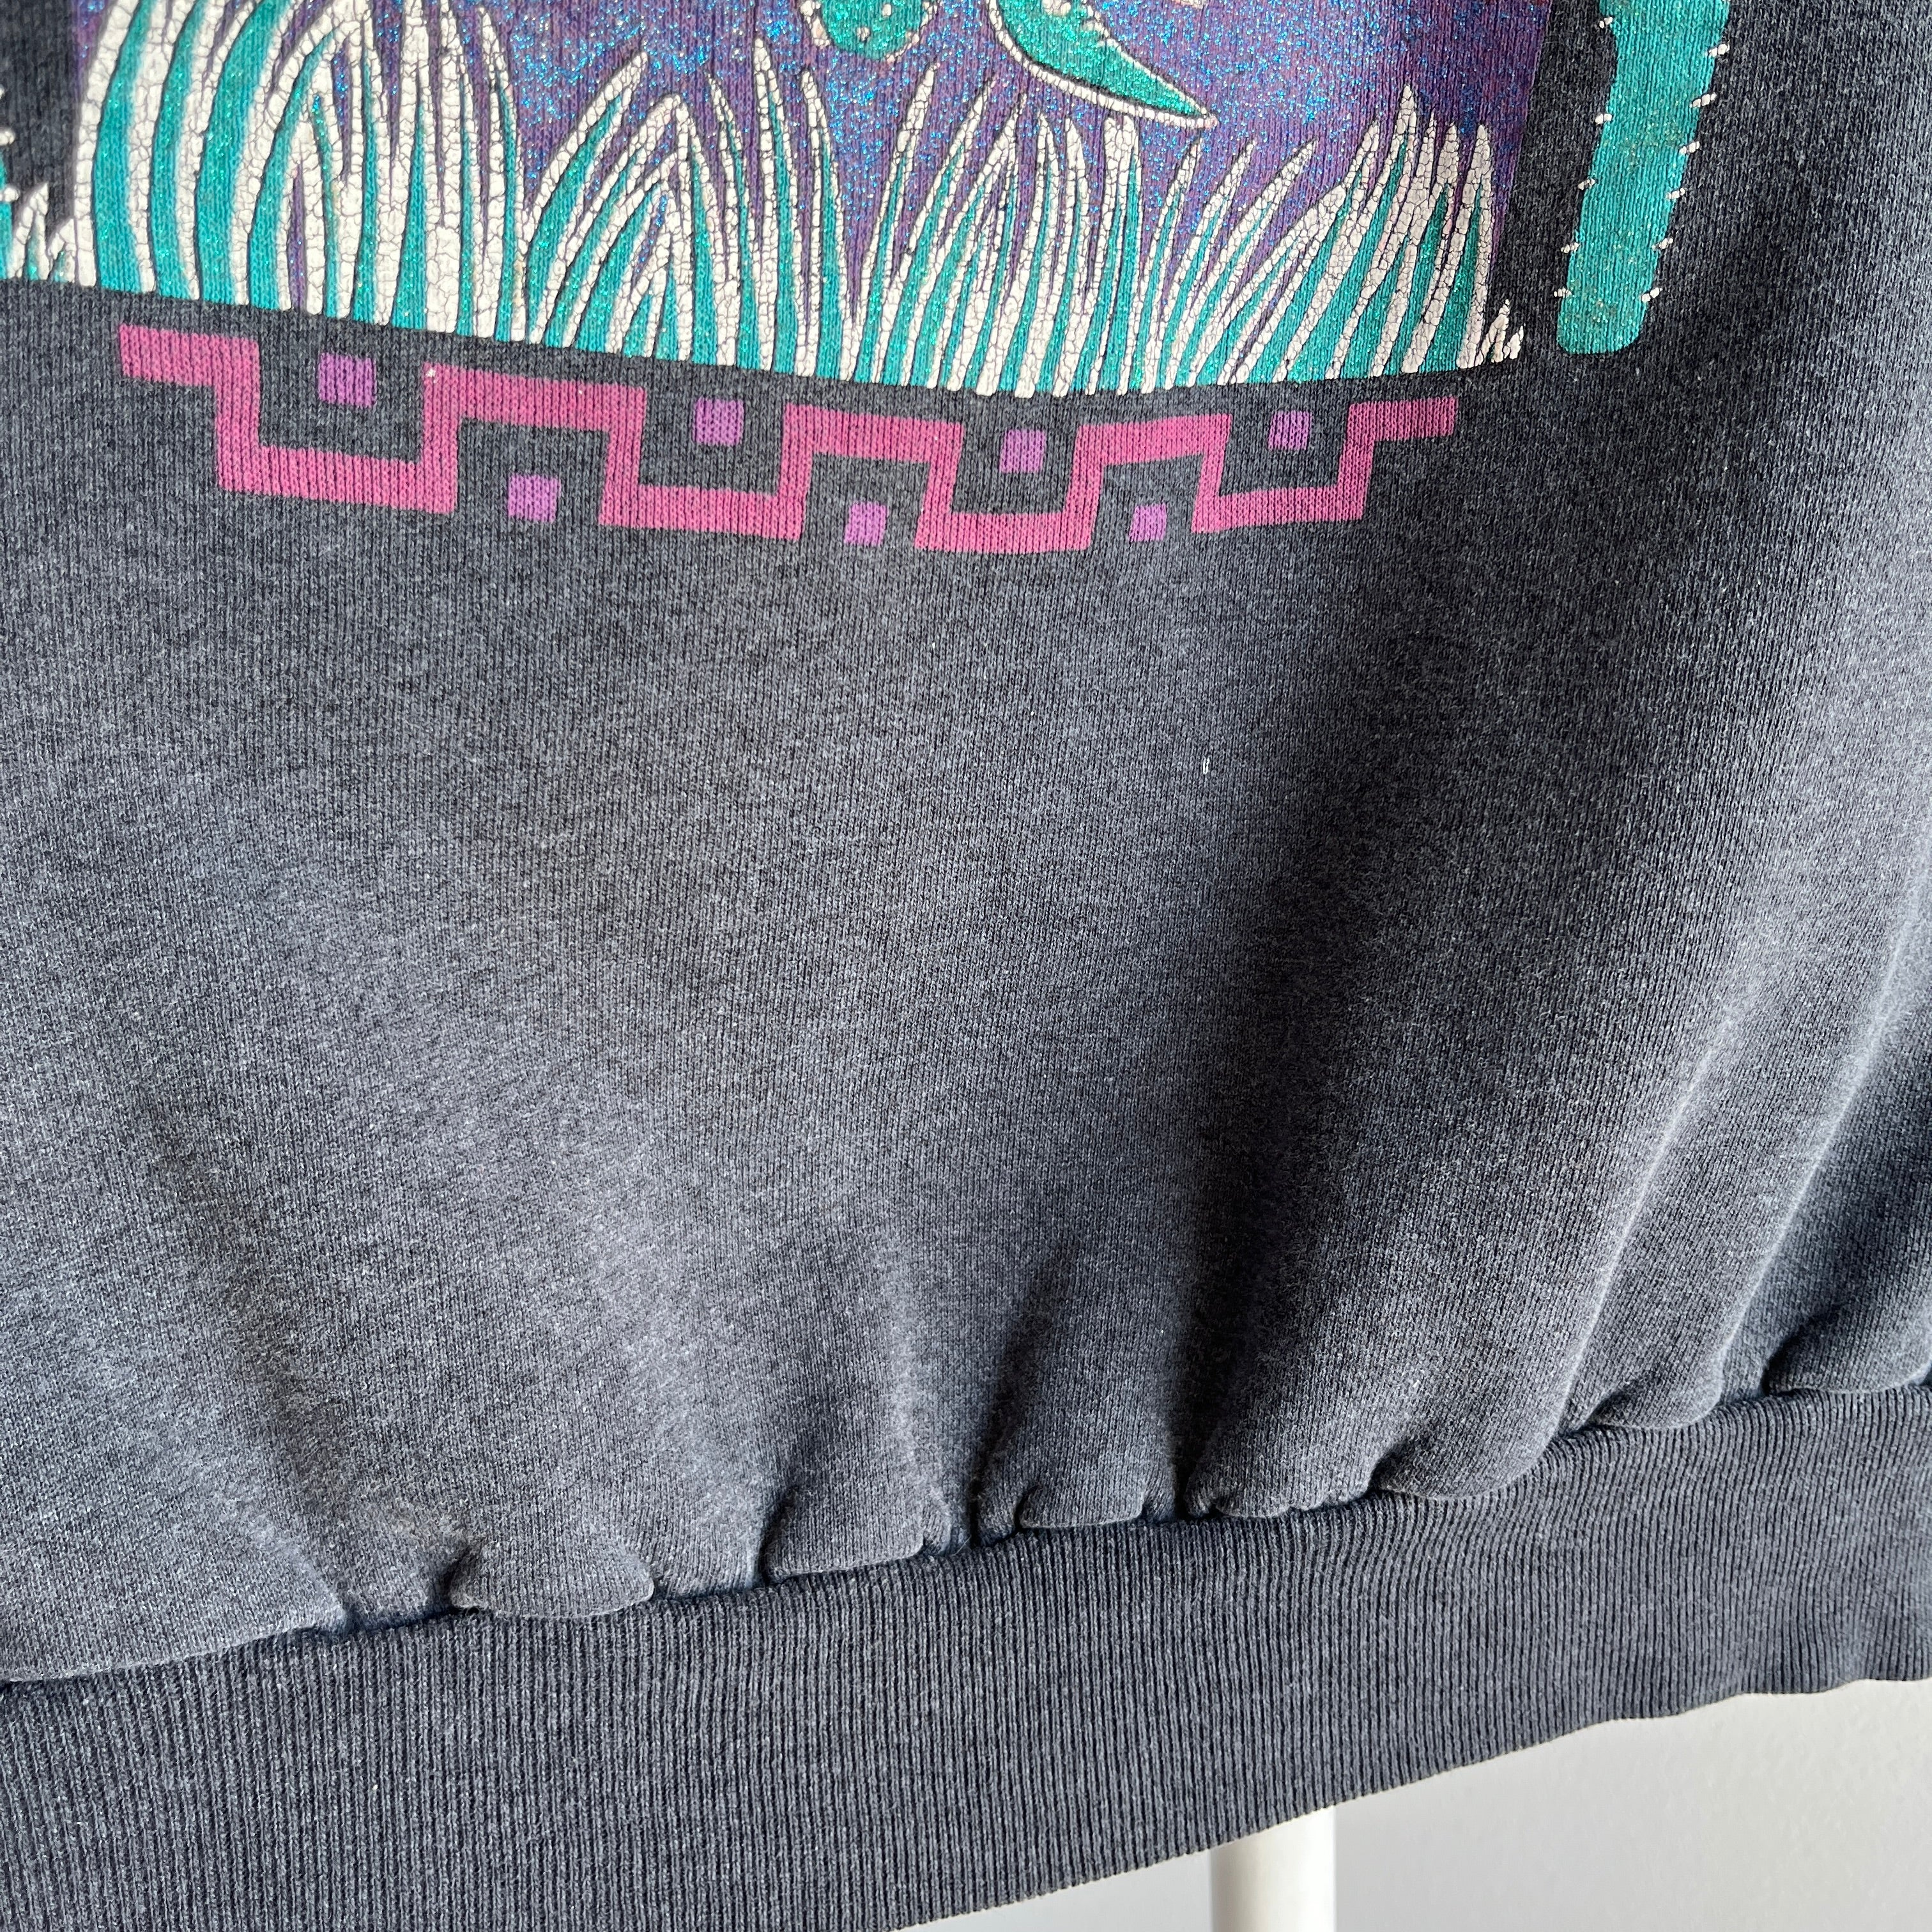 1980s Texas Sweatshirt - There's a Roadrunner In The Mix!